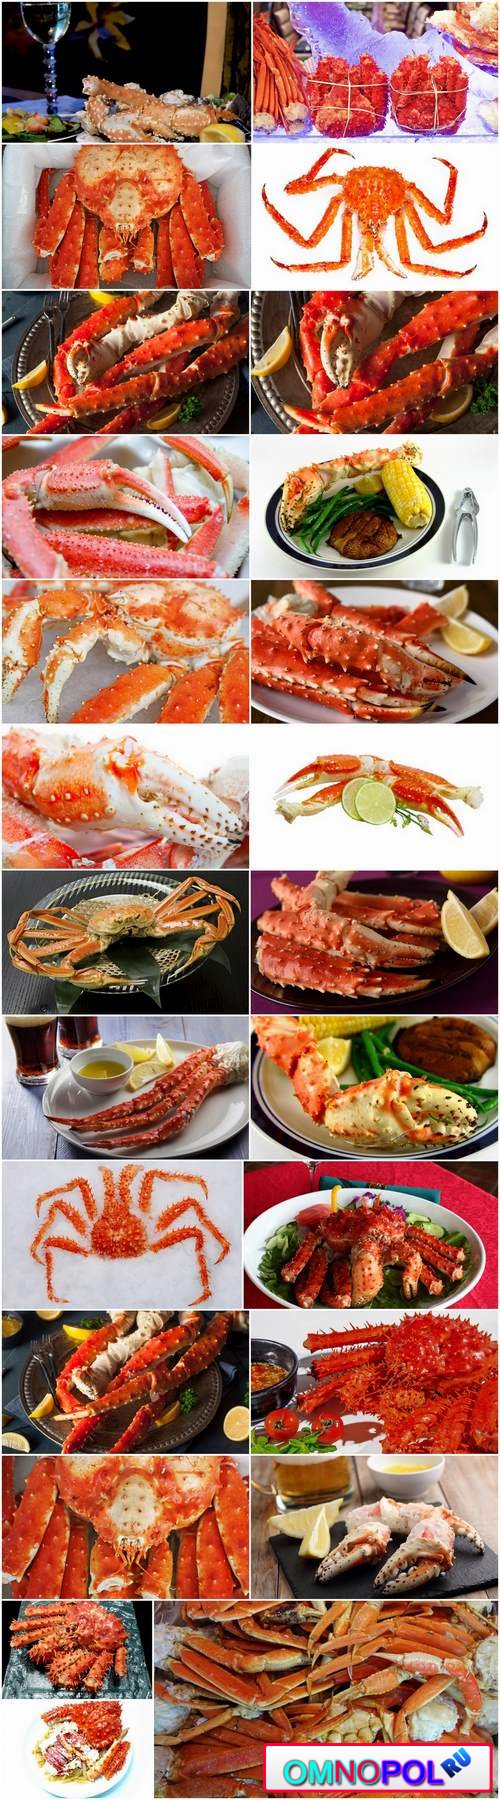 King crab claw seafood delicacy 25 HQ Jpeg